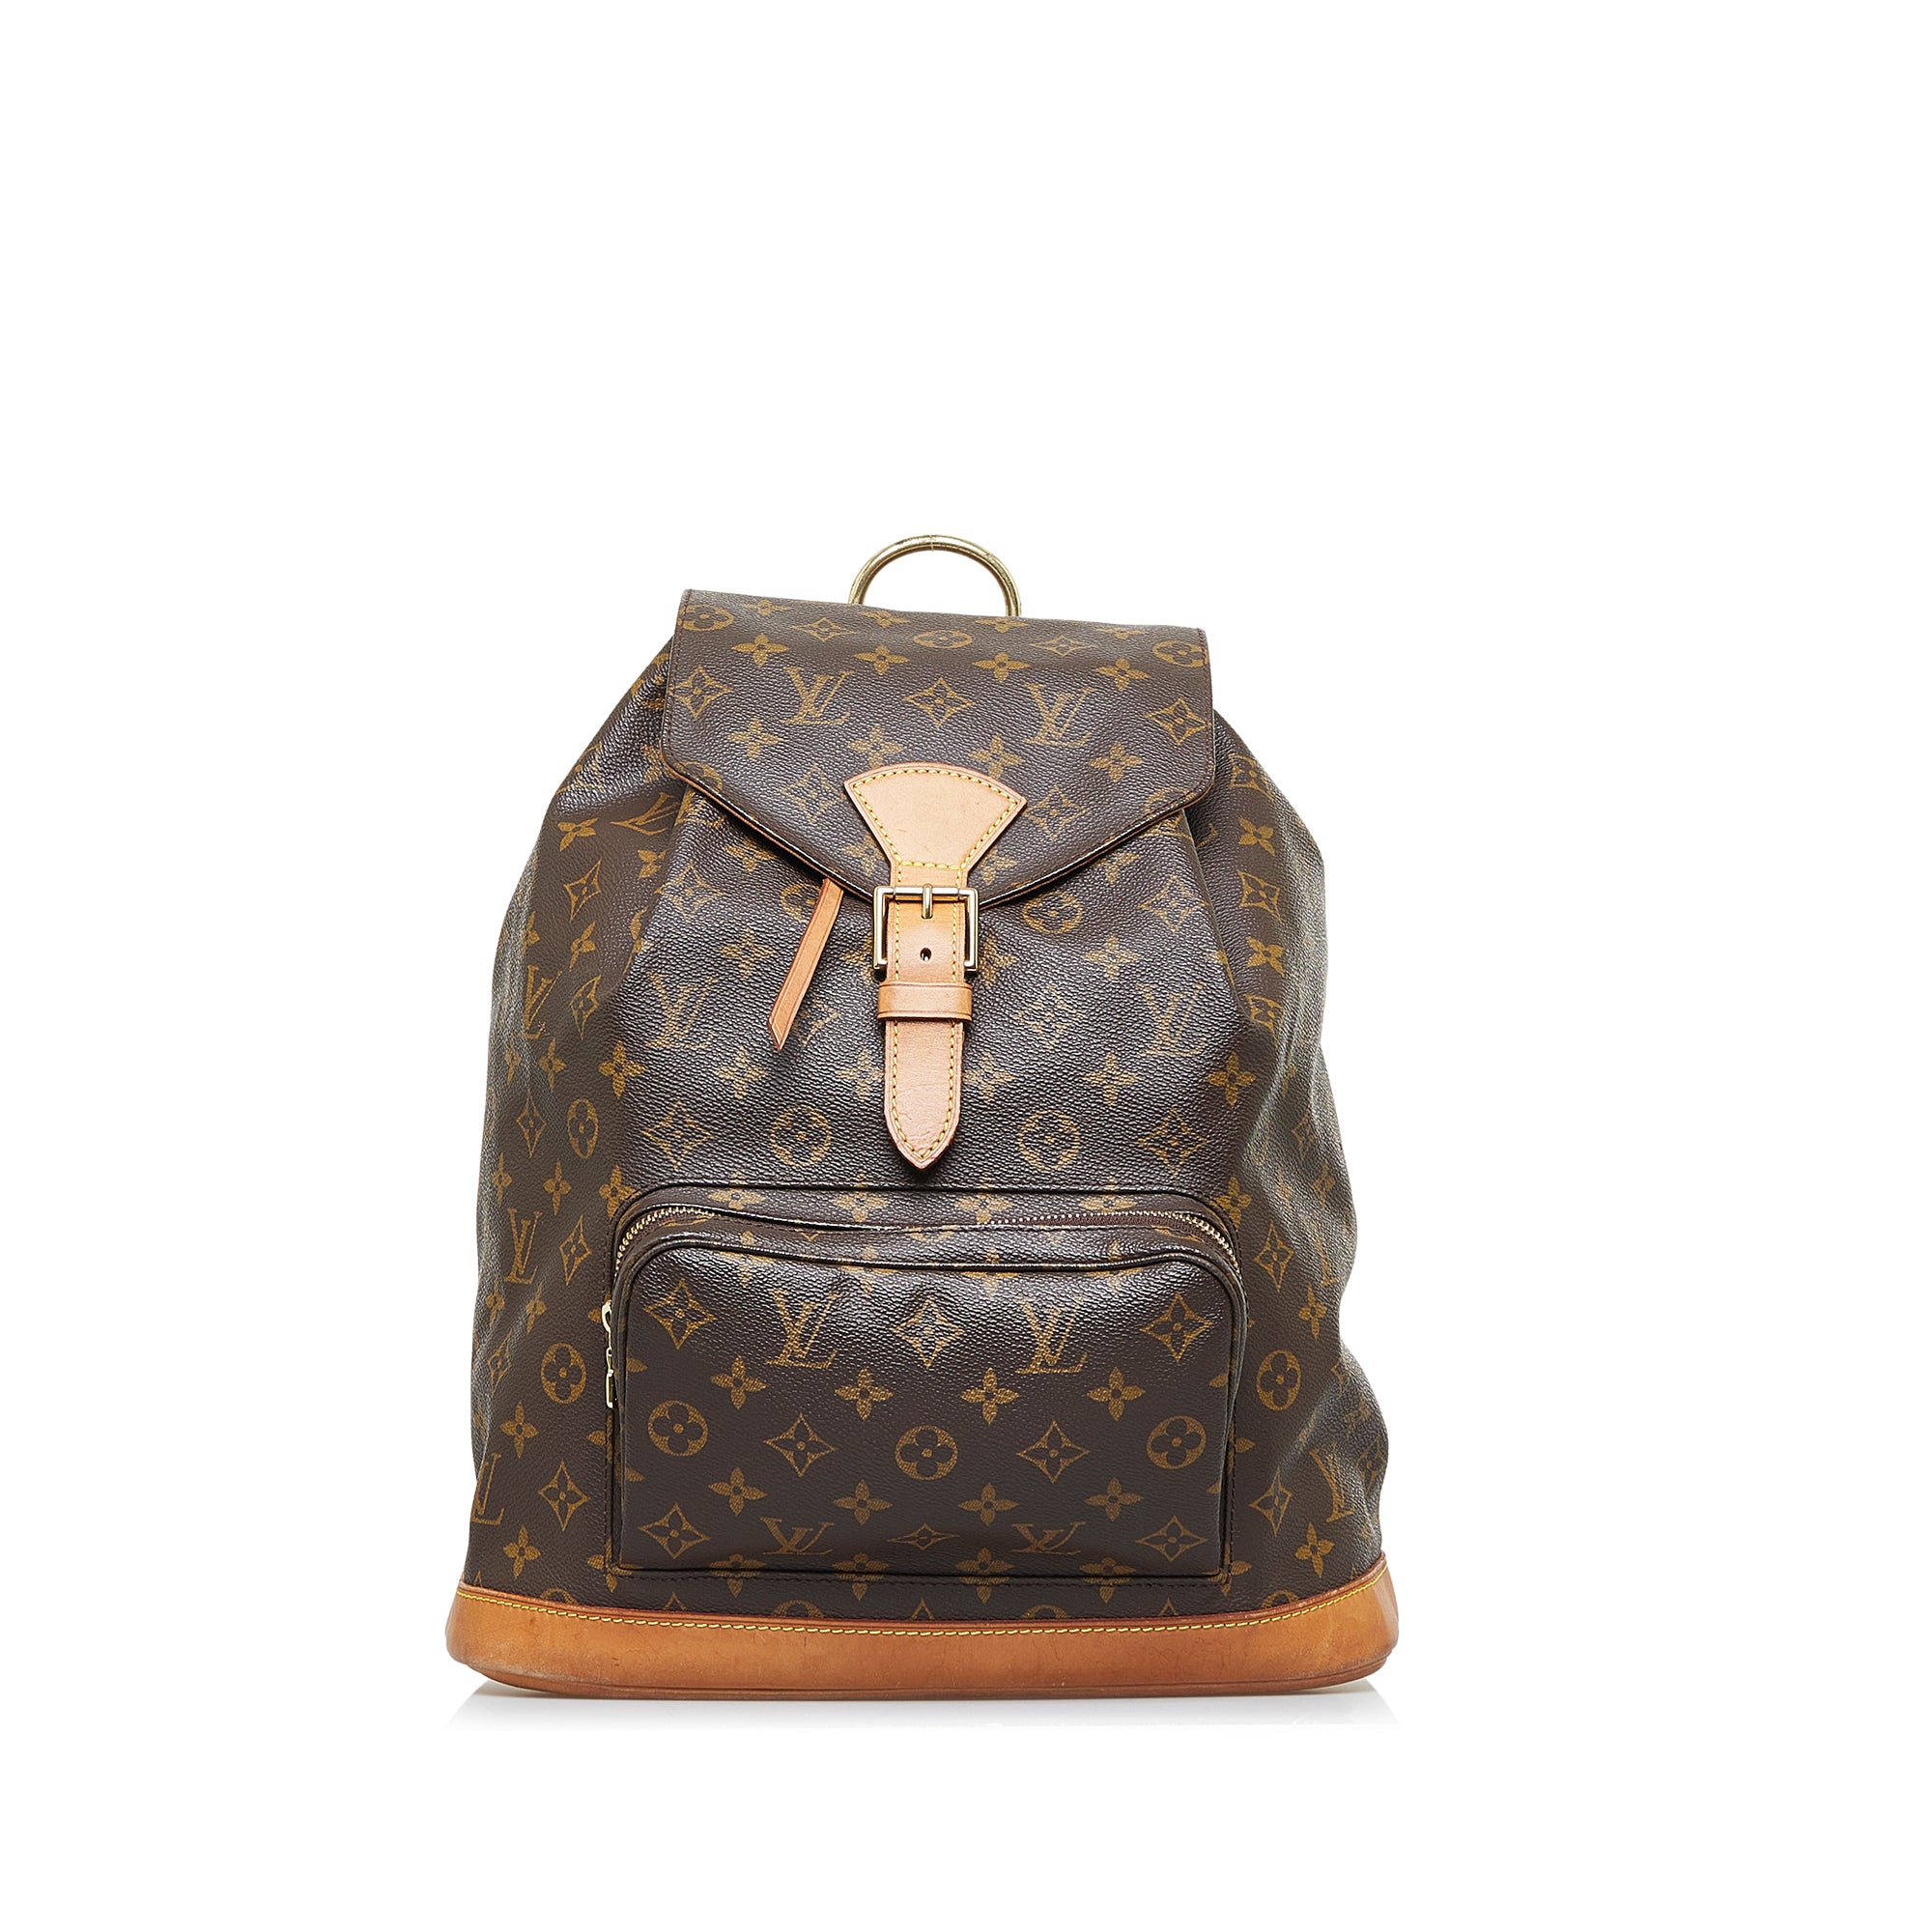 Pre-Owned Louis Vuitton Montsouris GM Monogram Backpack 